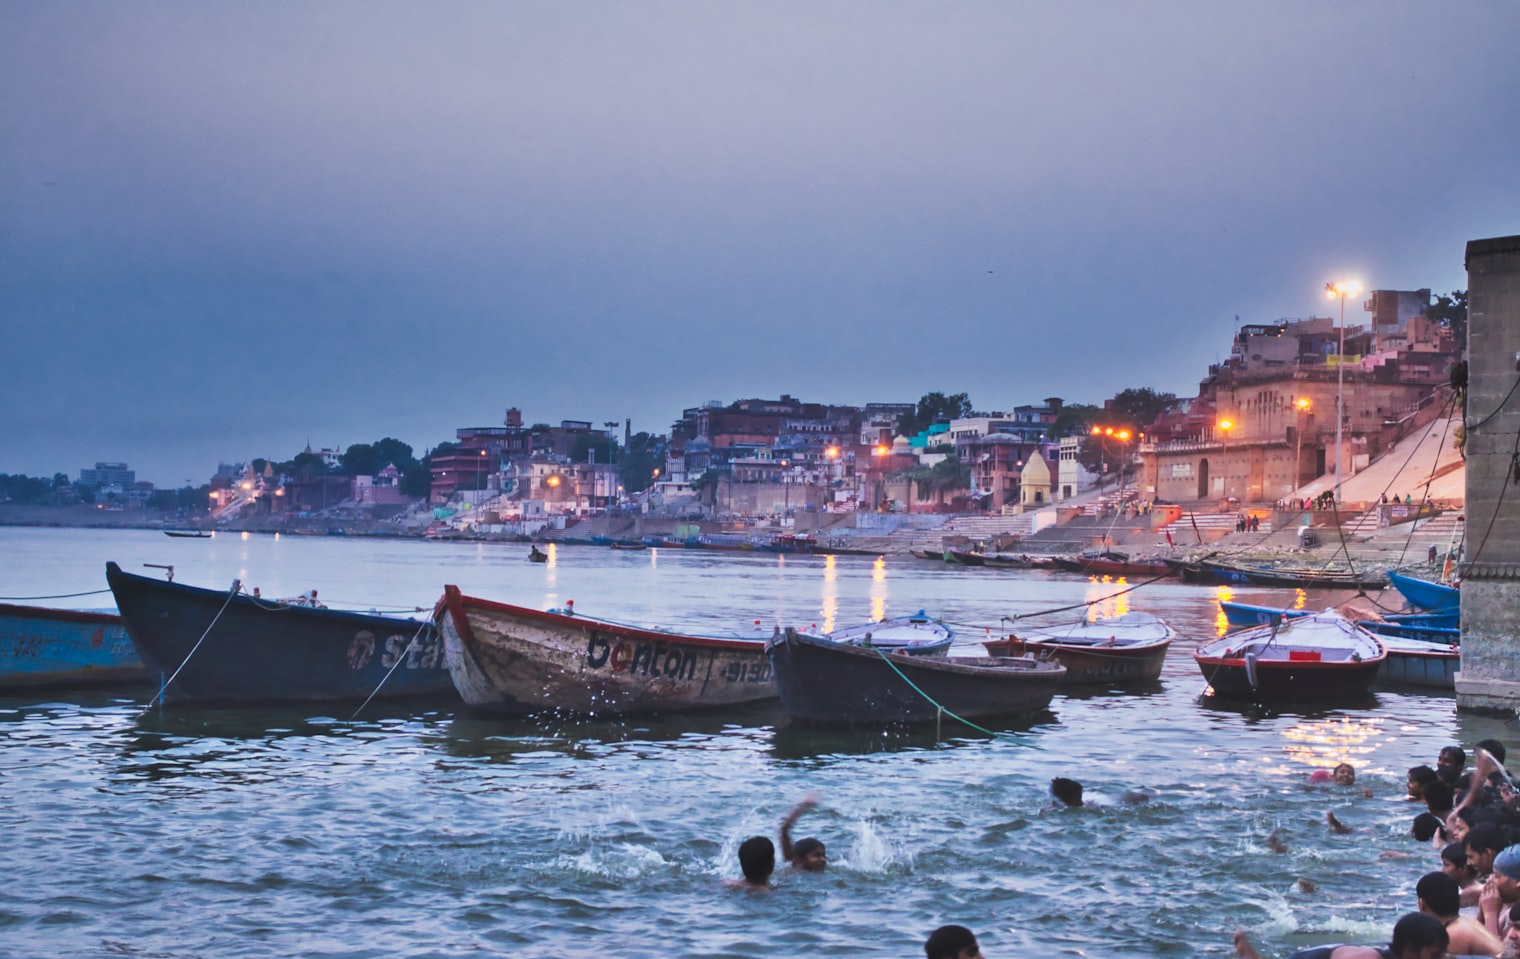 One of the main reasons people visit Varanasi is to take part in the city's many spiritual and religious practices